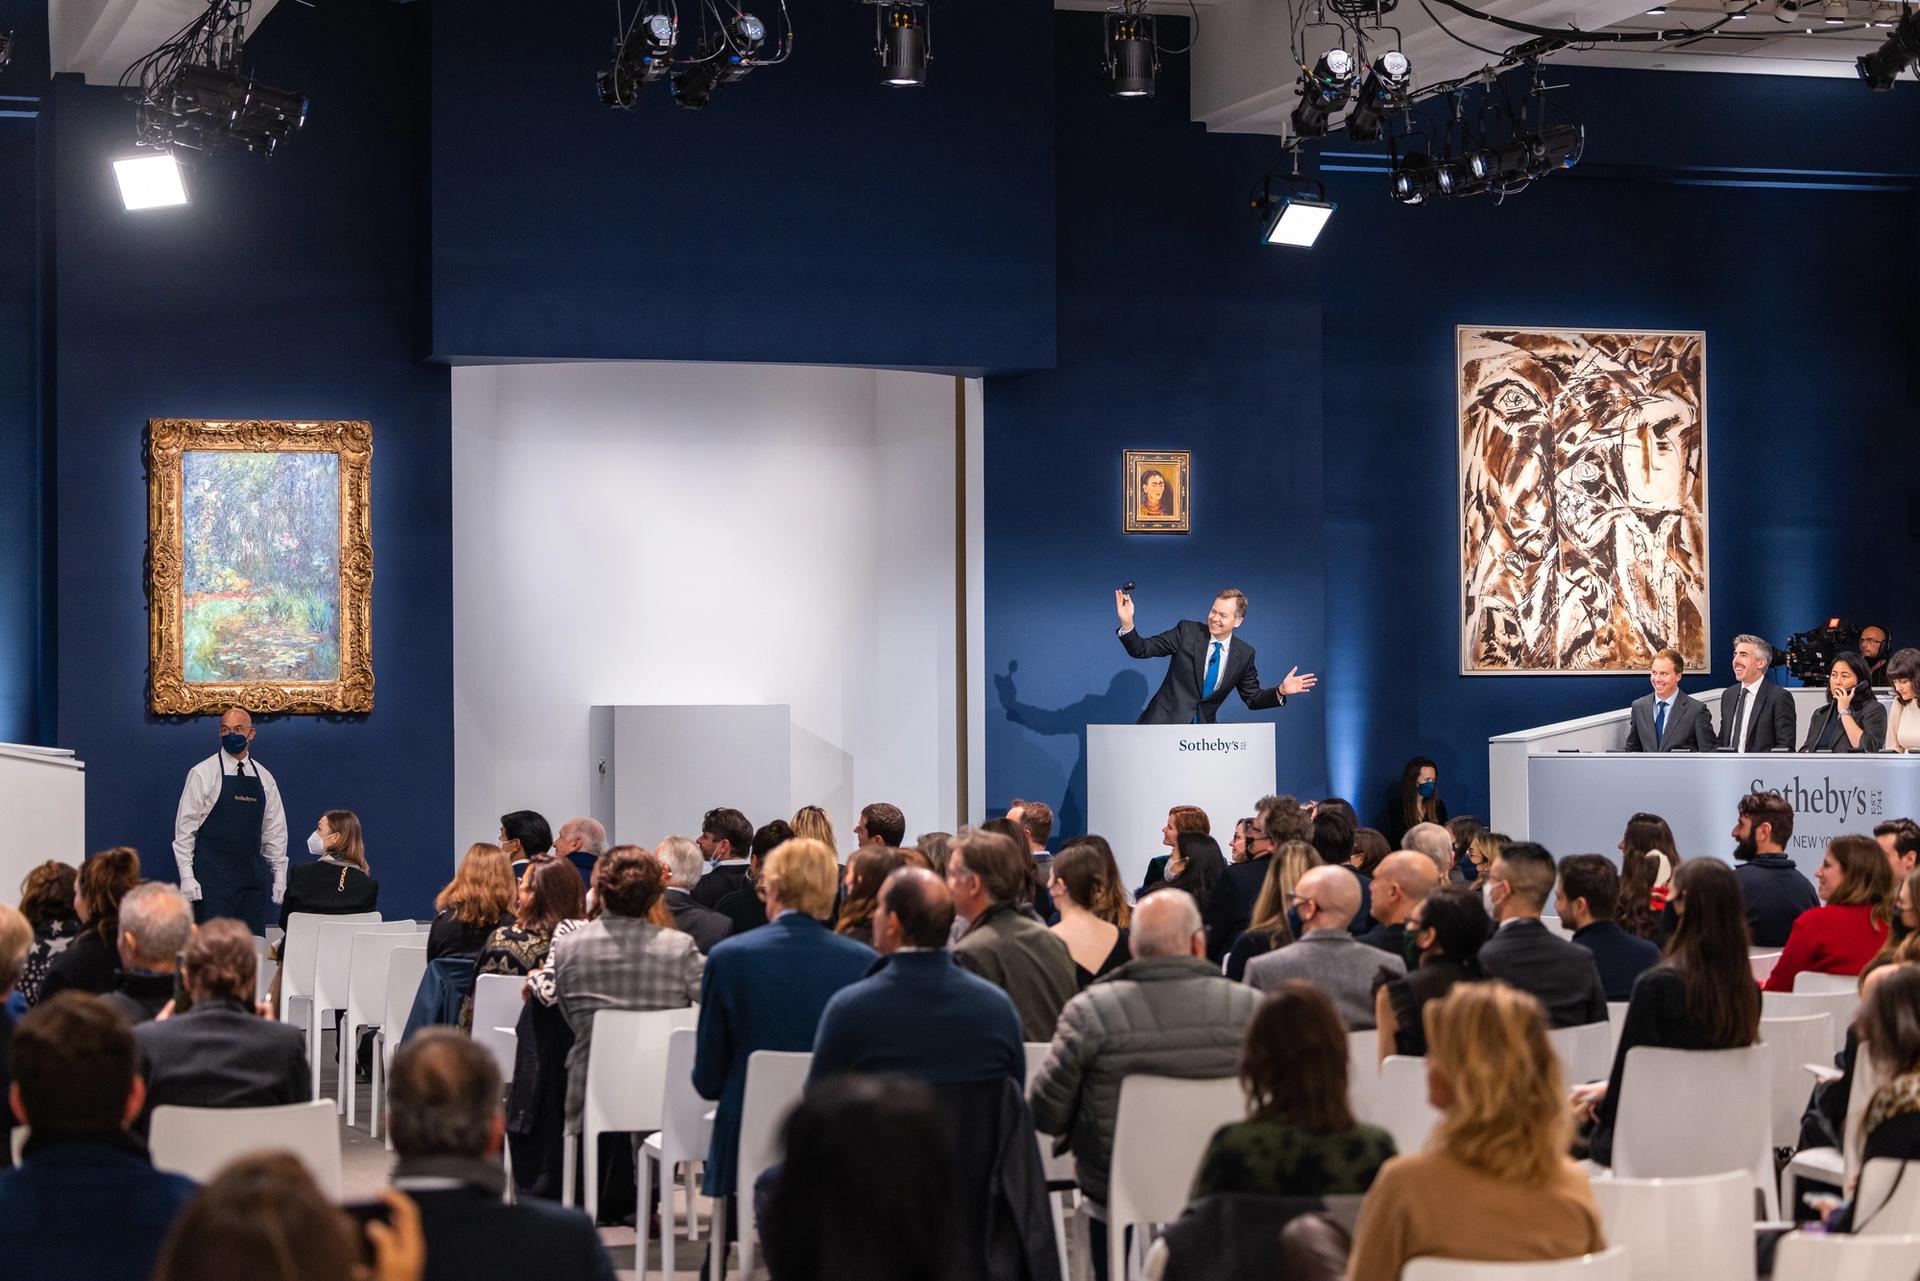 Oliver Barker on the rostrum at last night's Modern art evening sale at Sotheby's in New York

Courtesy of Sotheby's